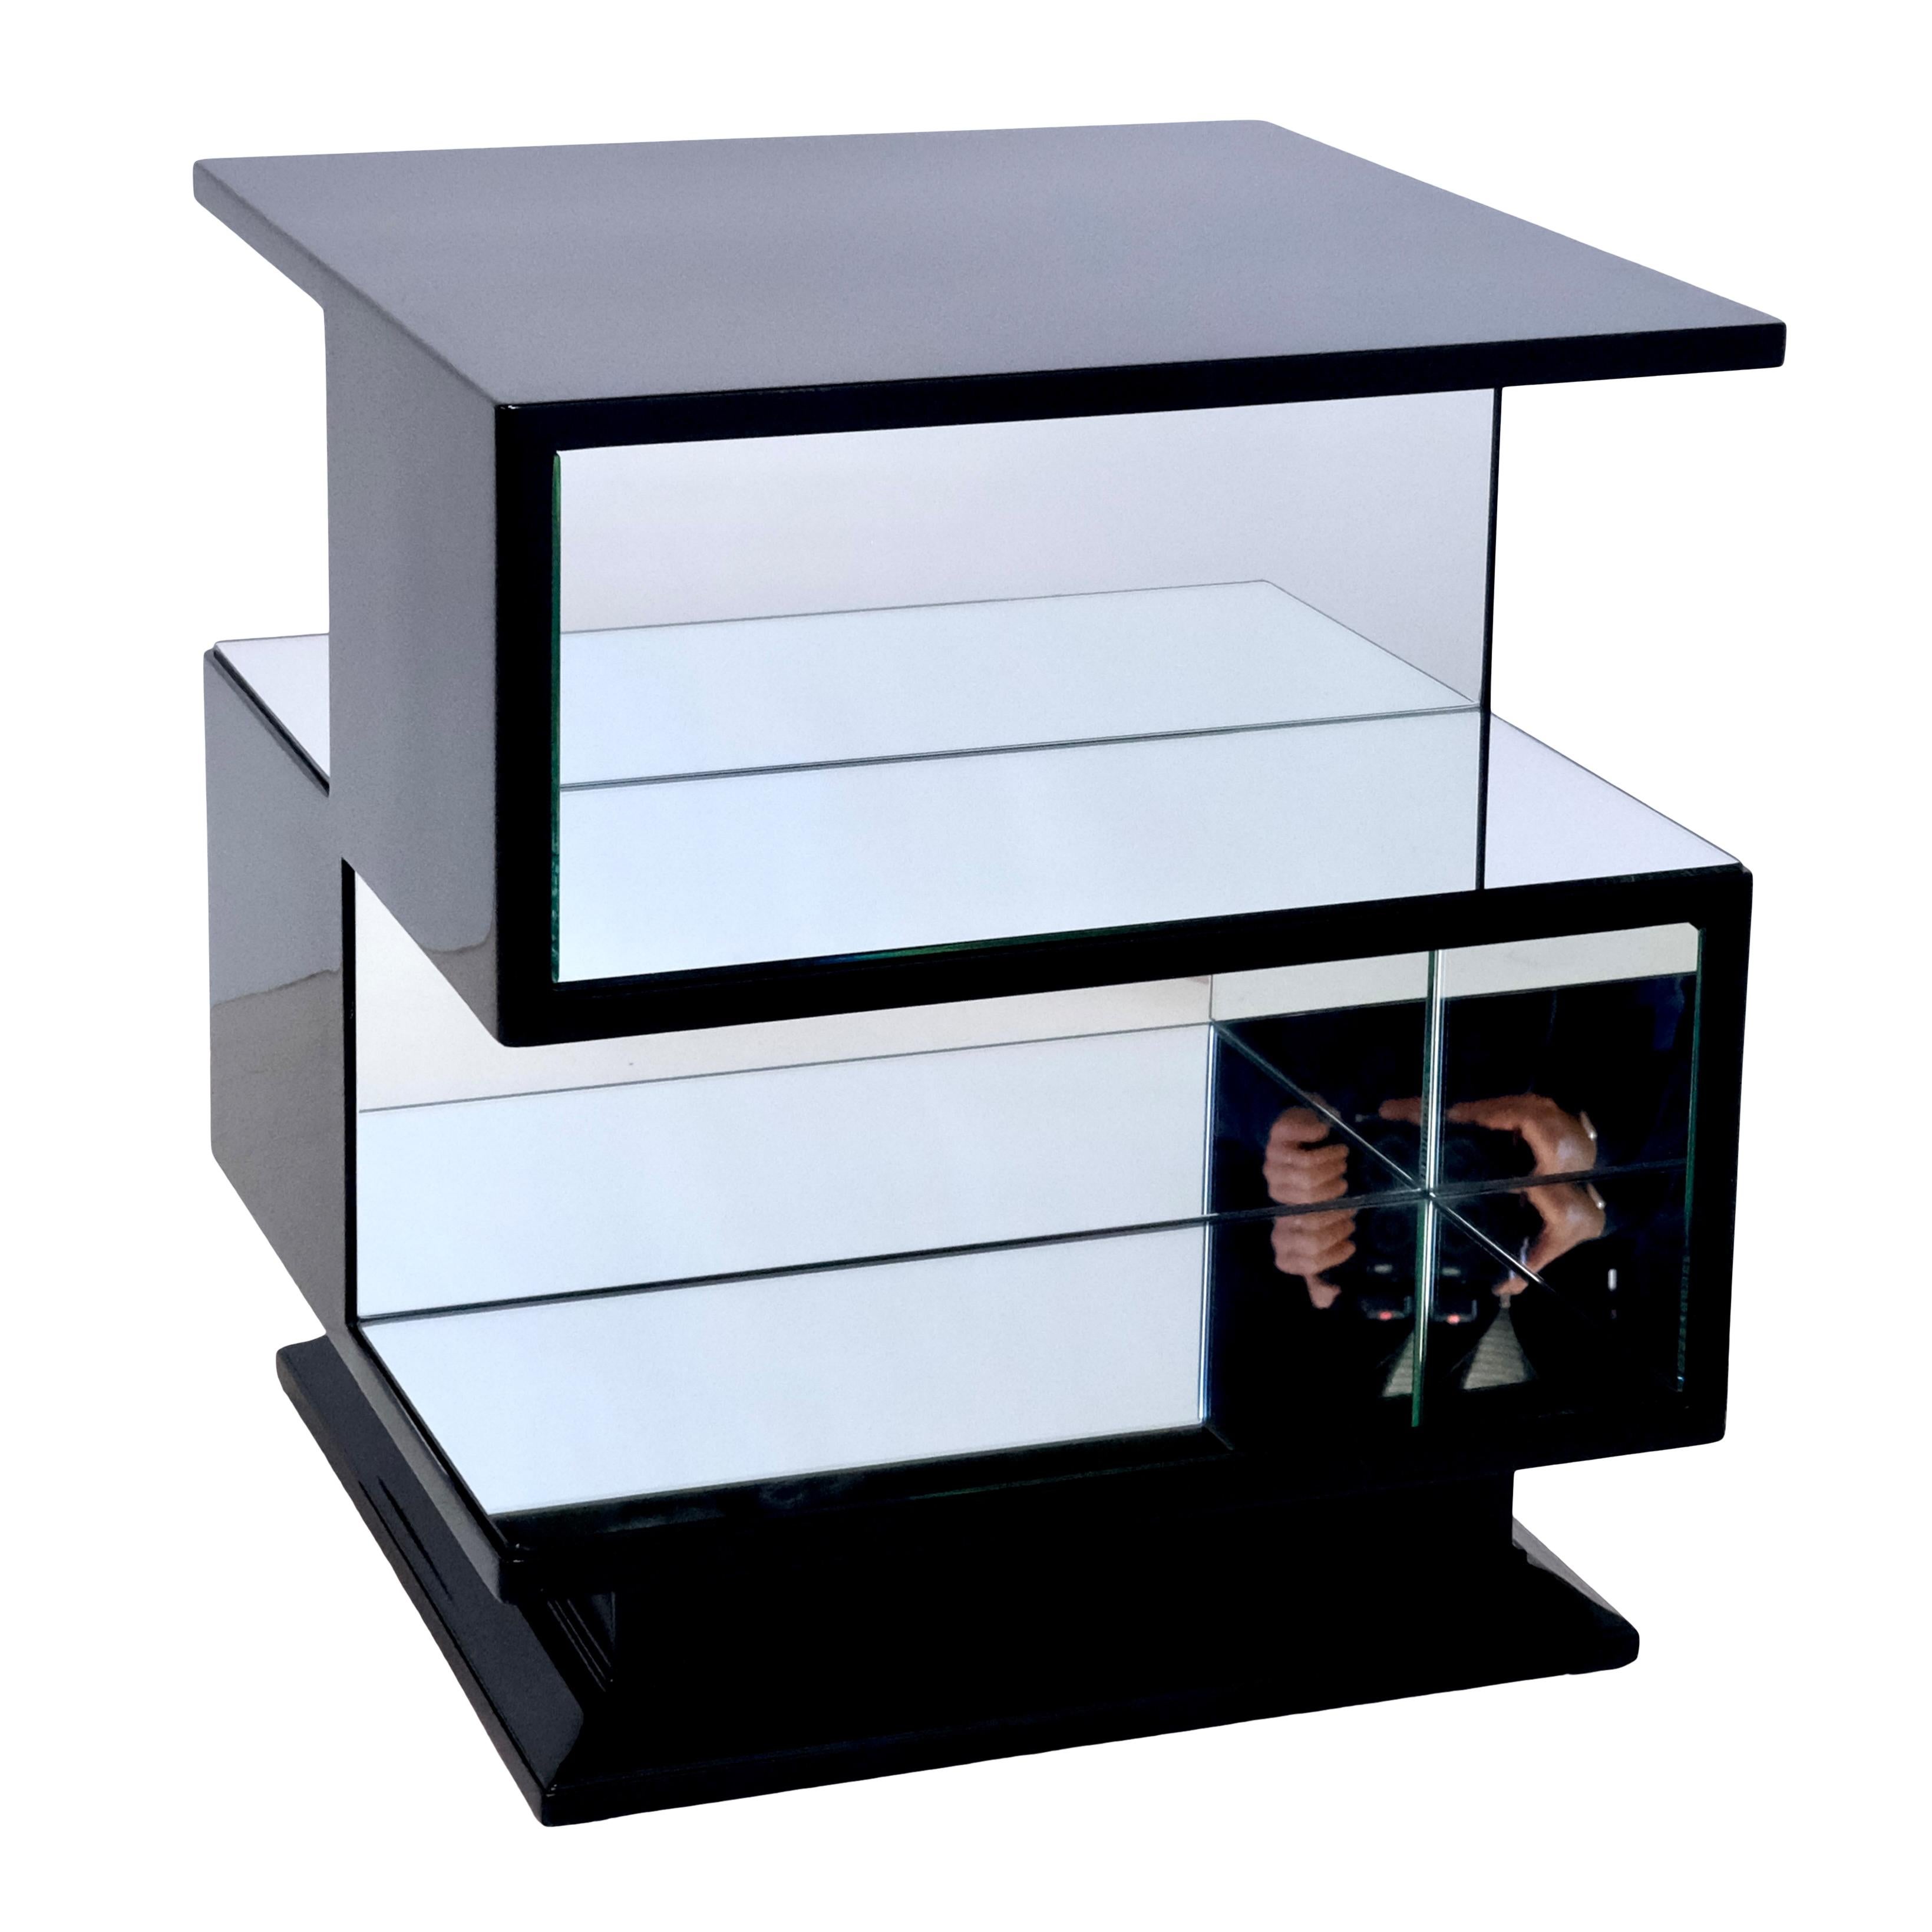 Quadratic side table
High gloss black piano lacquer
Mirrored surfaces

Original Art Deco, France 1930s

Dimensions:
Width: 53 cm
Height: 59 cm
Depth: 53 cm